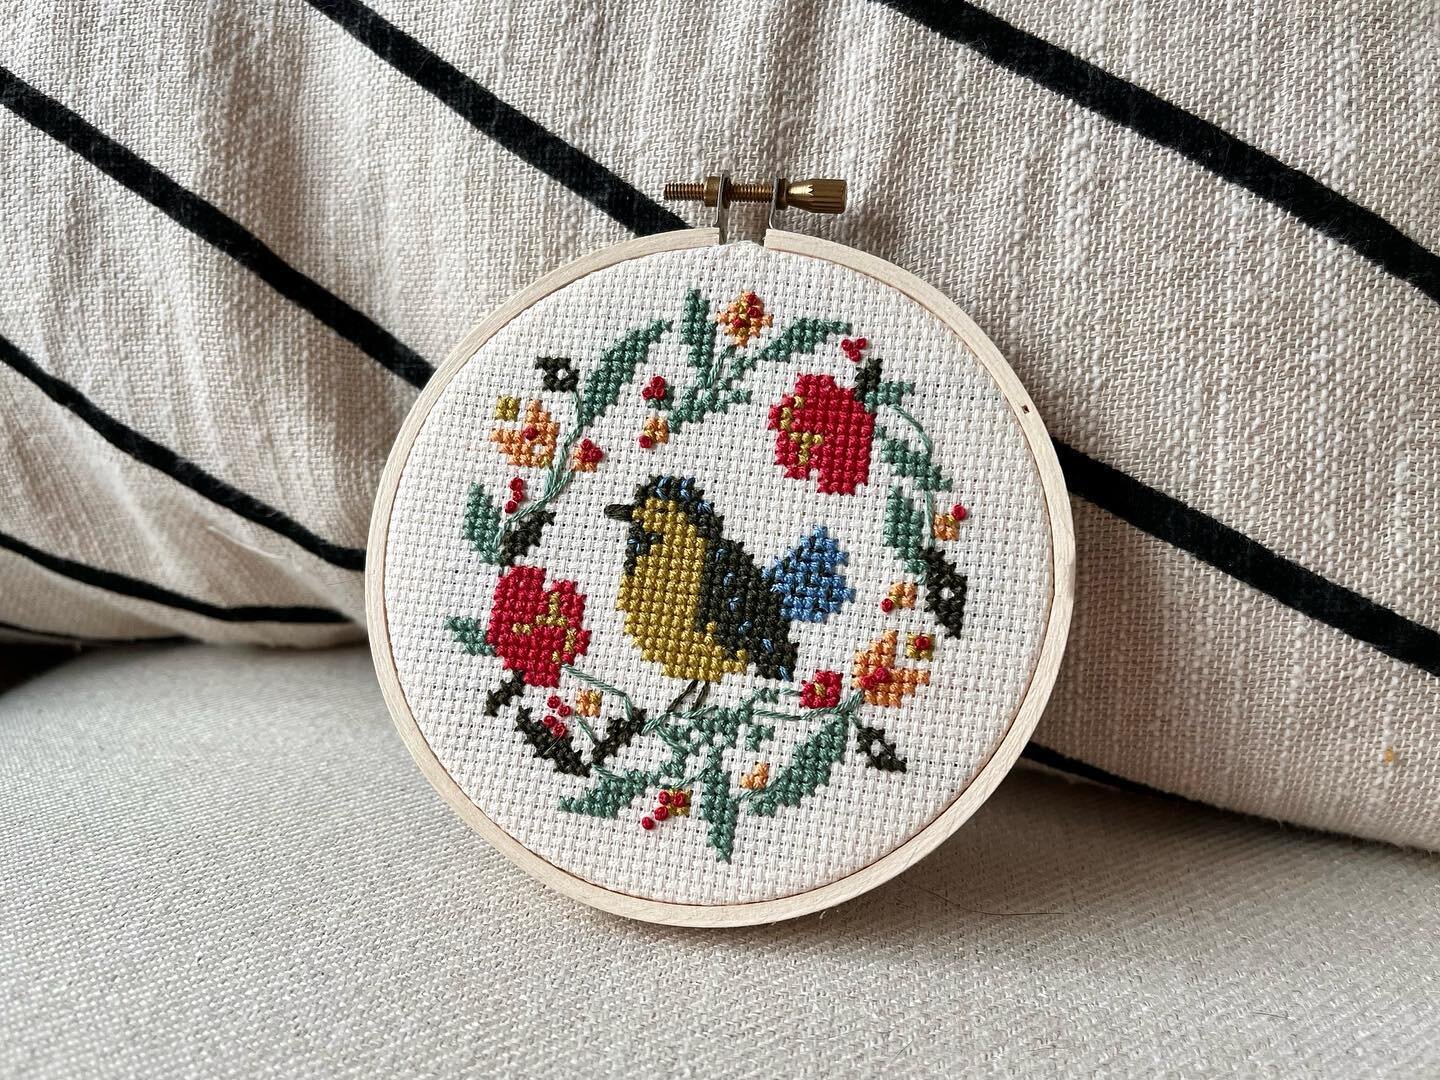 4&rdquo; Summer Bird
-
Love all the colors for this one
-
Find pattern @junebuganddarlin